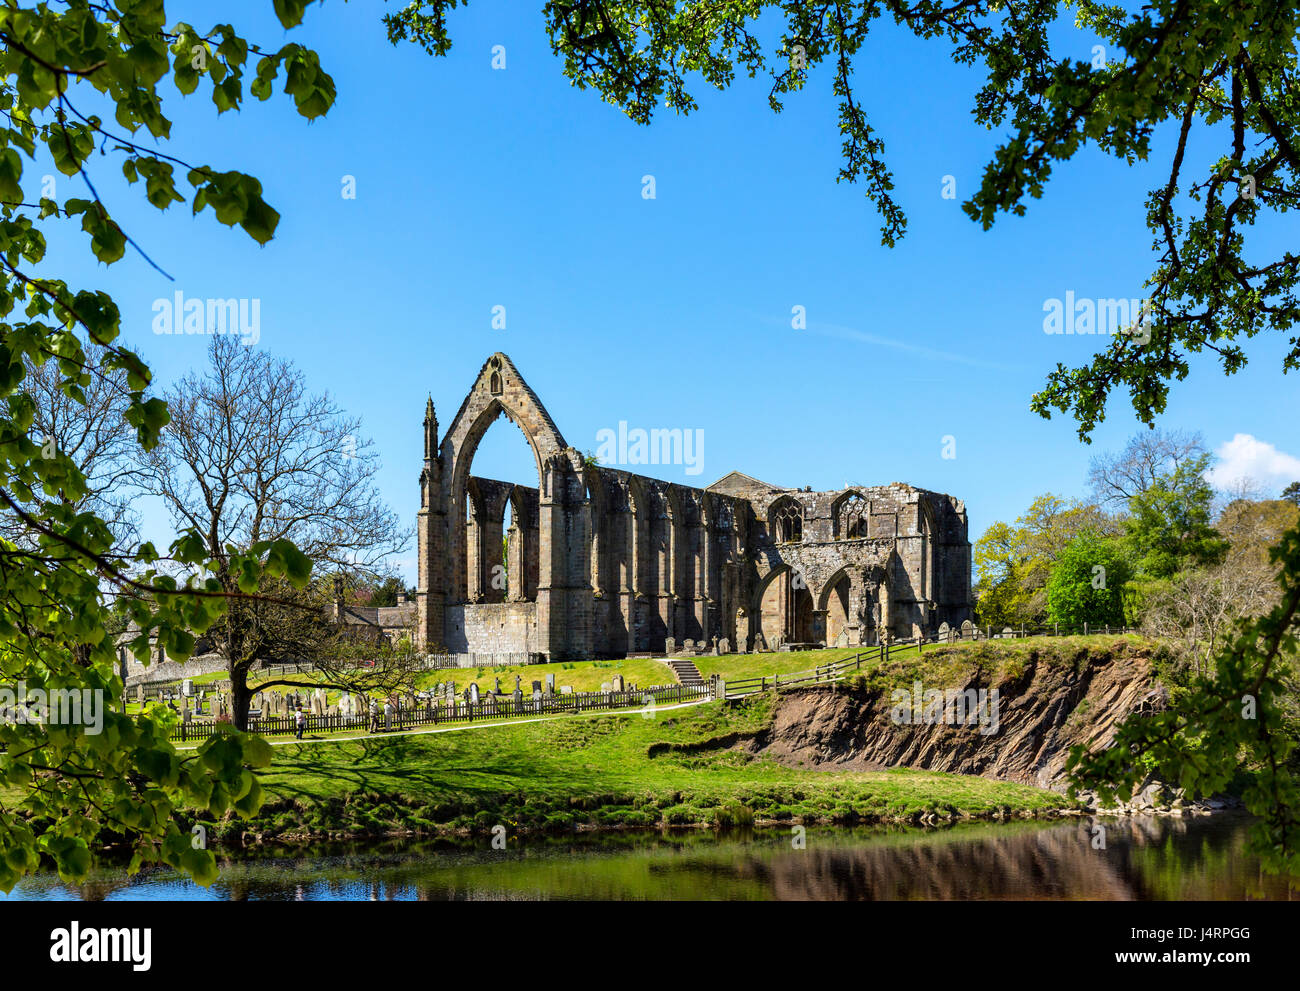 Bolton Priory, Bolton Abbey, Wharfedale, Yorkshire Dales National Park, North Yorkshire, Inghilterra, Regno Unito Foto Stock